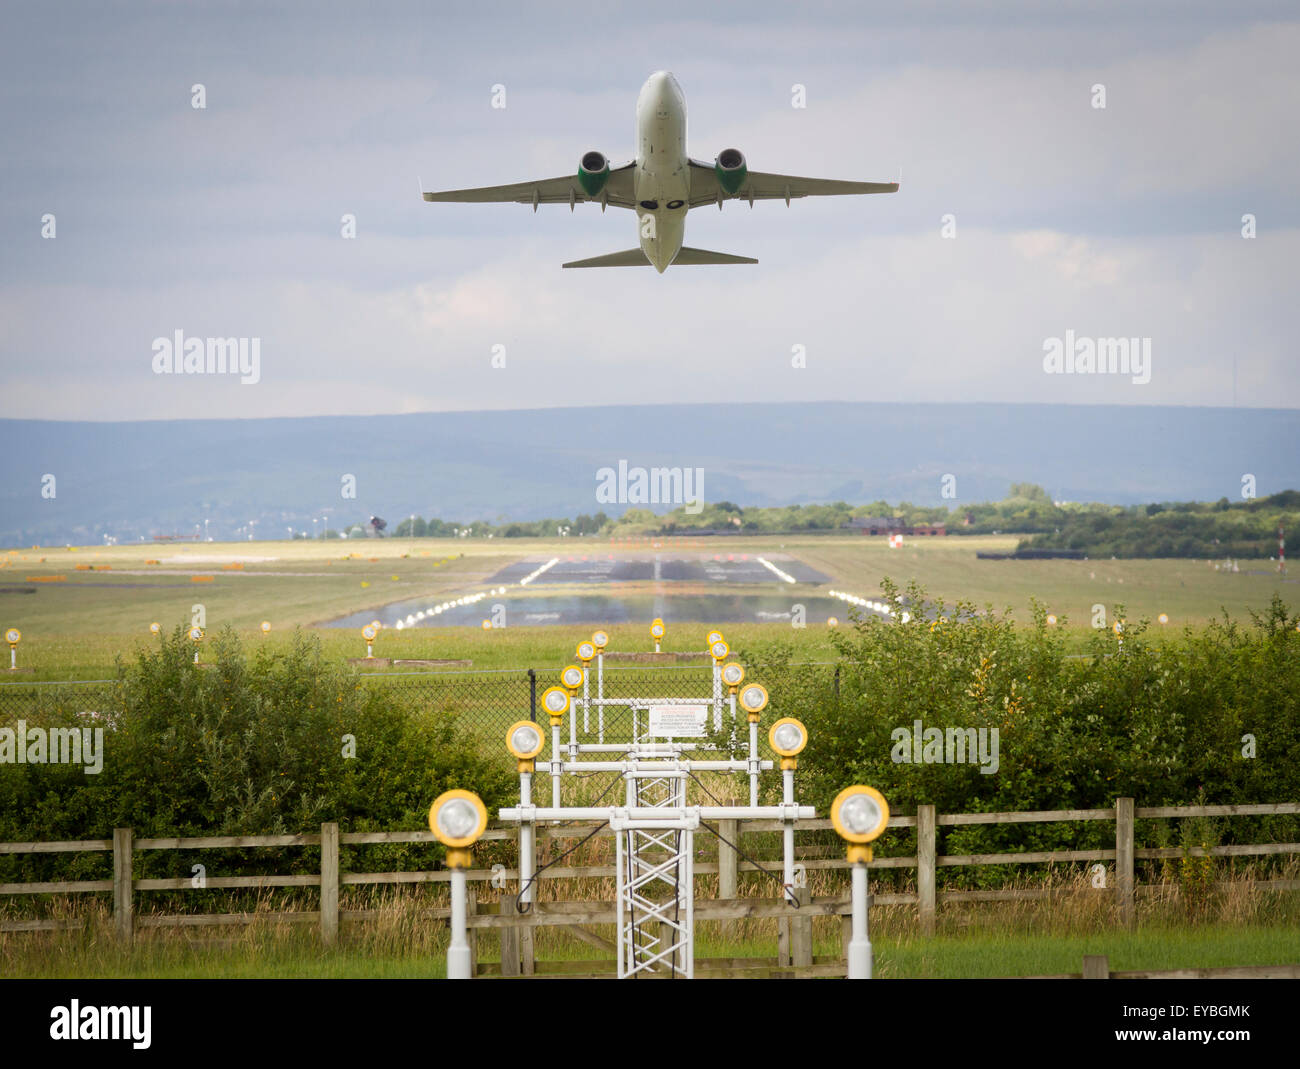 Plane taking off or landing at Manchester Airport Stock Photo